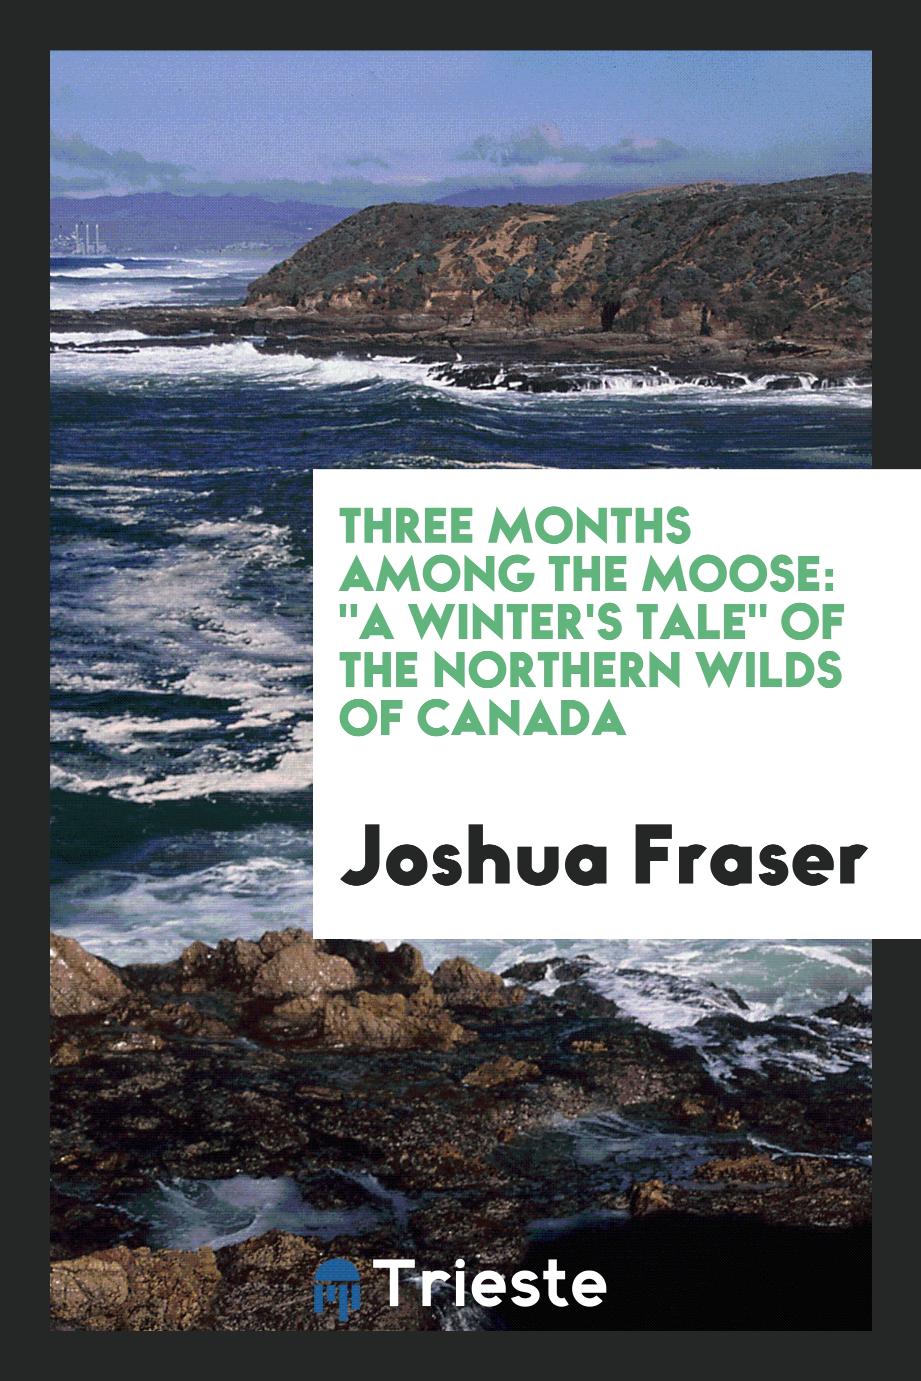 Three Months among the Moose: "A Winter's Tale" of the Northern Wilds of Canada